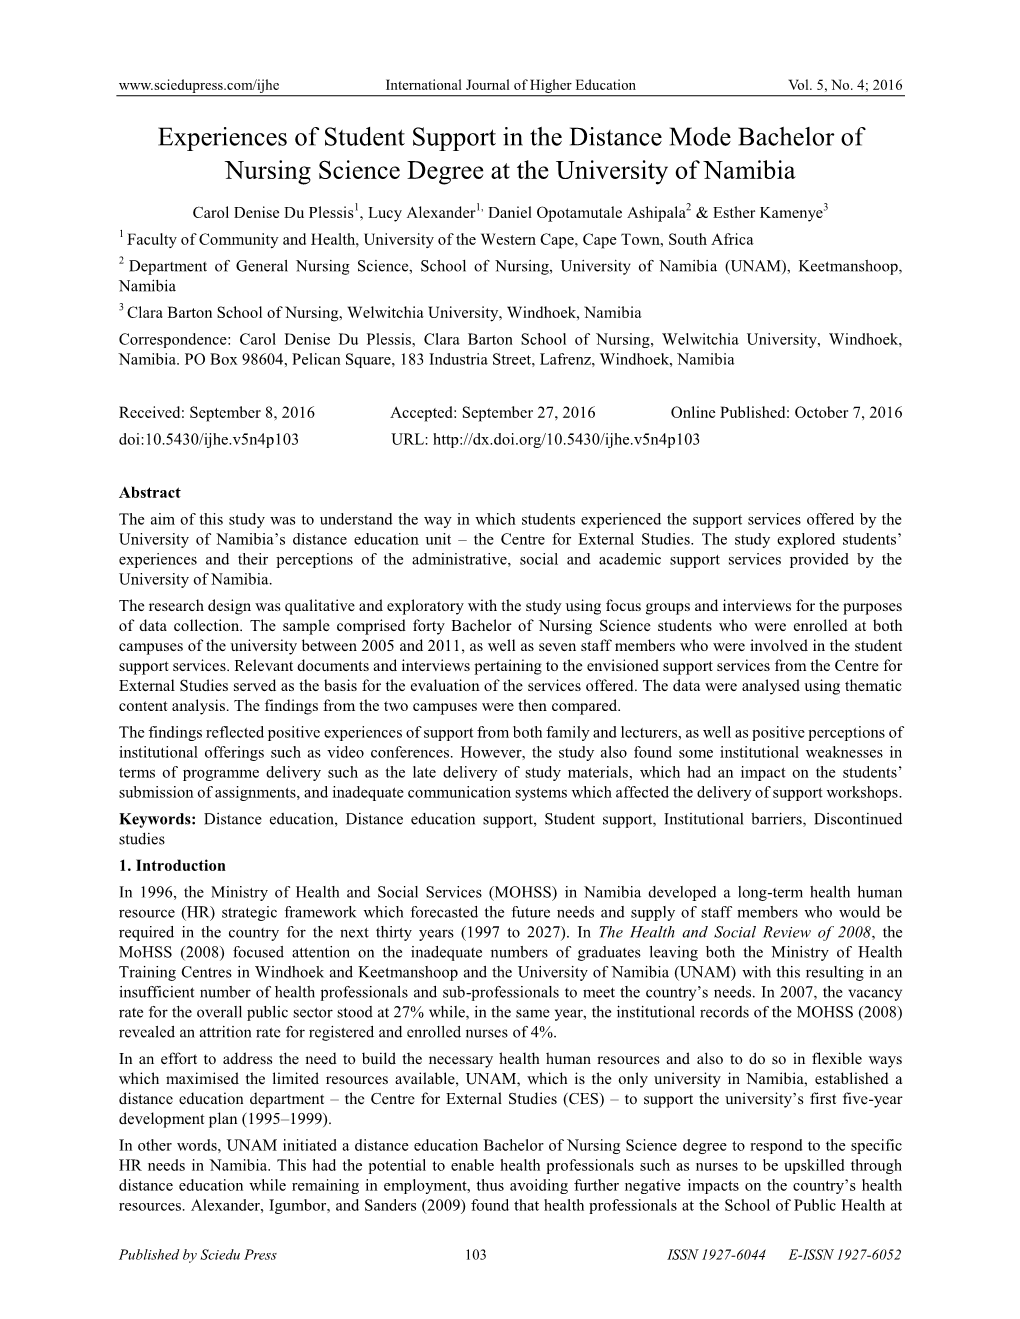 Experiences of Student Support in the Distance Mode Bachelor of Nursing Science Degree at the University of Namibia